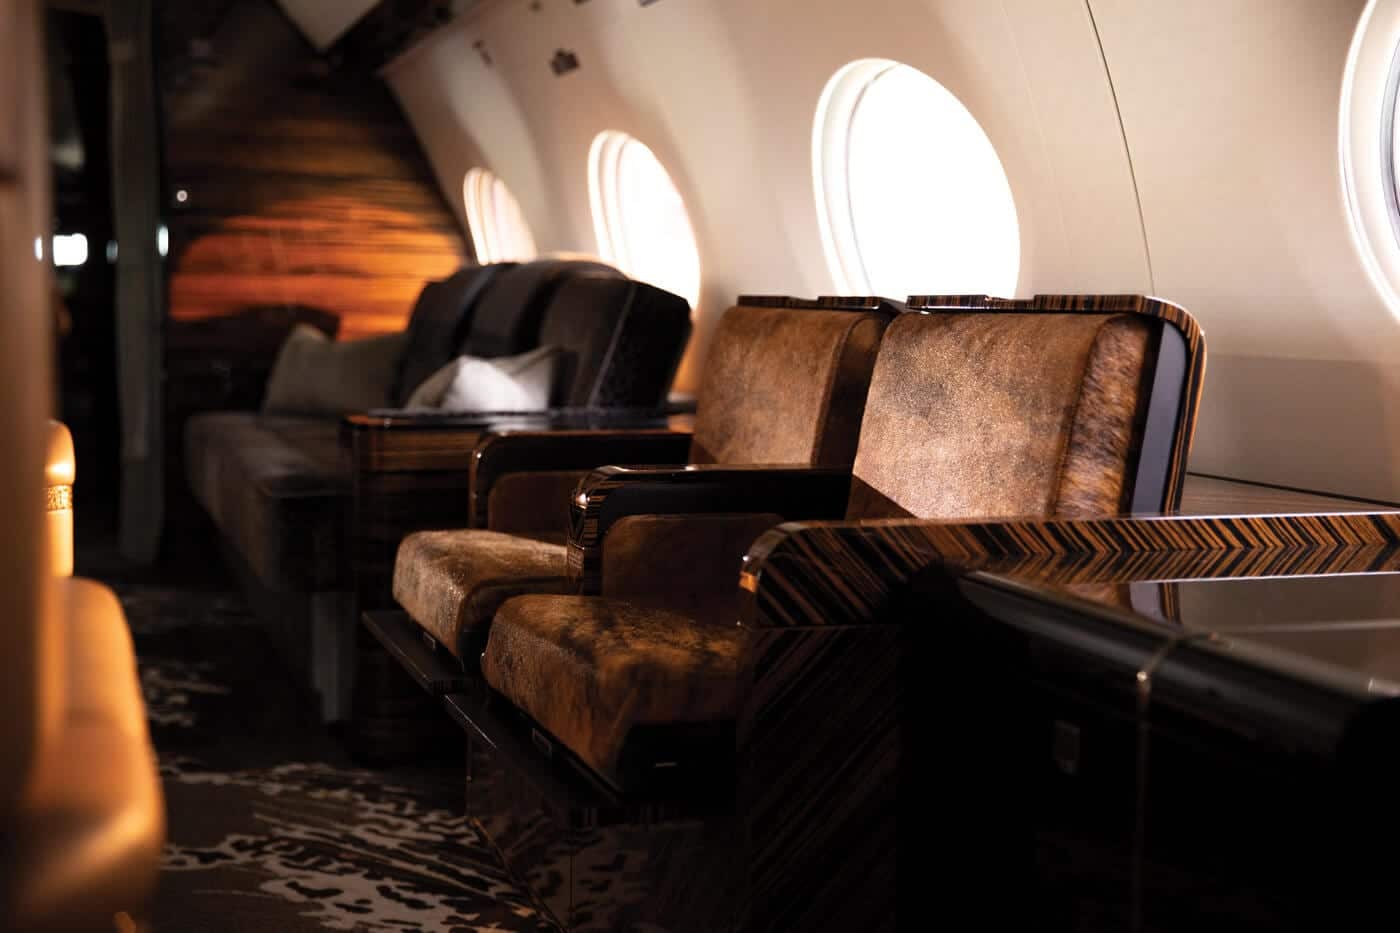 LXi Cabin Collection, Gulfstream G650, Ultra Long Range, Cosmos Interior, Flexjet, seating view, leather seating, jet interior, private jet, jet cabin, cabin interior, cabin view, addtional seating, ottoman, zebra wood